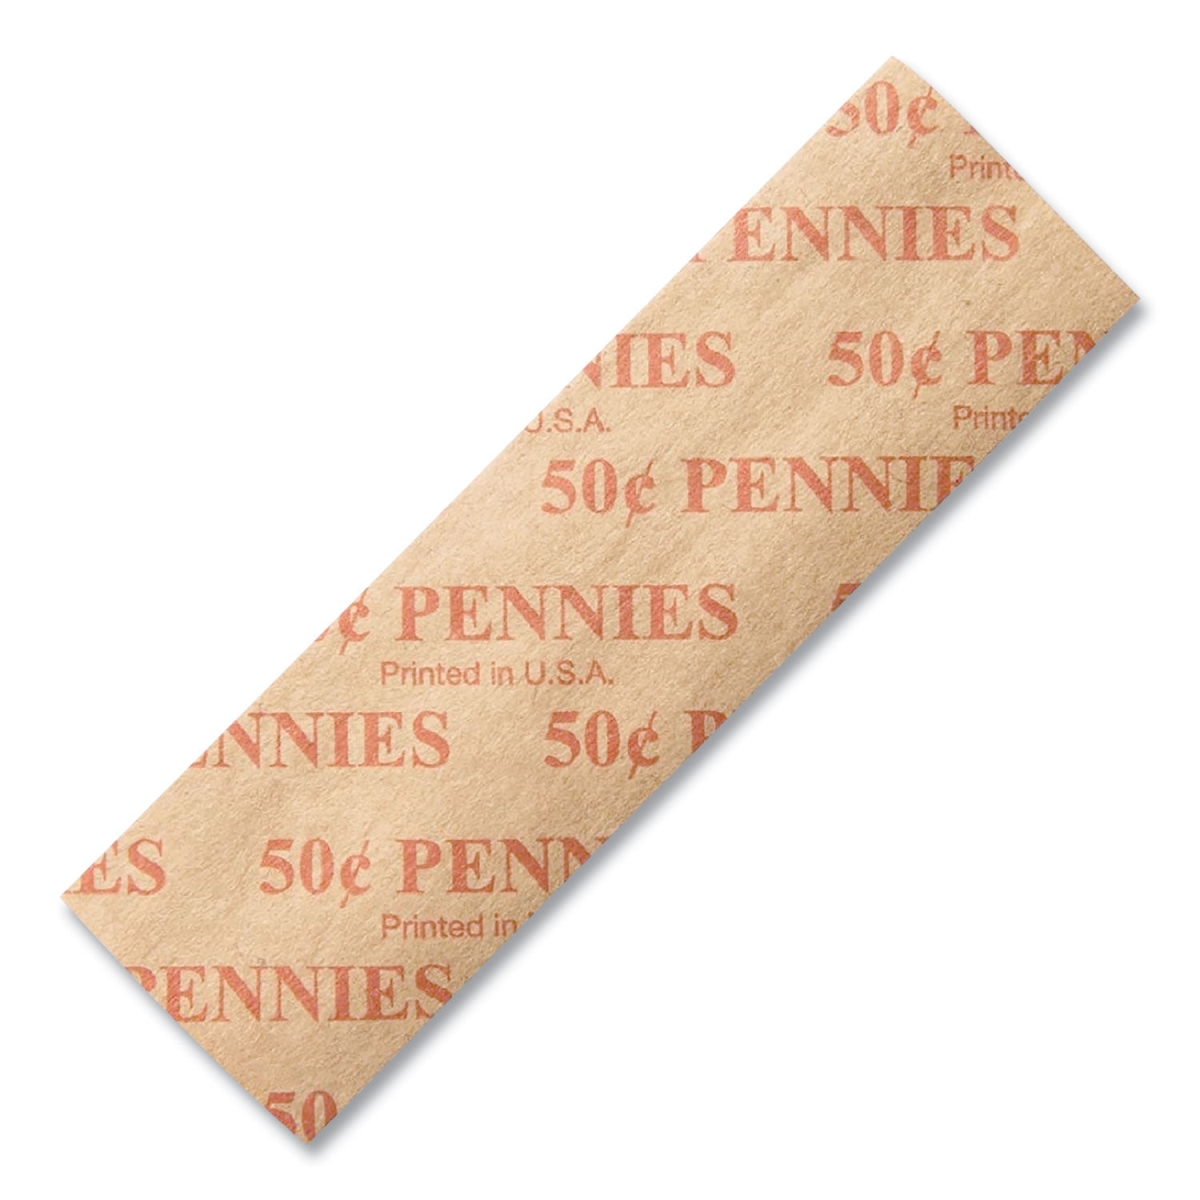 Picture of Dunbar Security Products 50PFL Pennies Flat Coin Wrappers, Red - 1000 Wrappers per Box